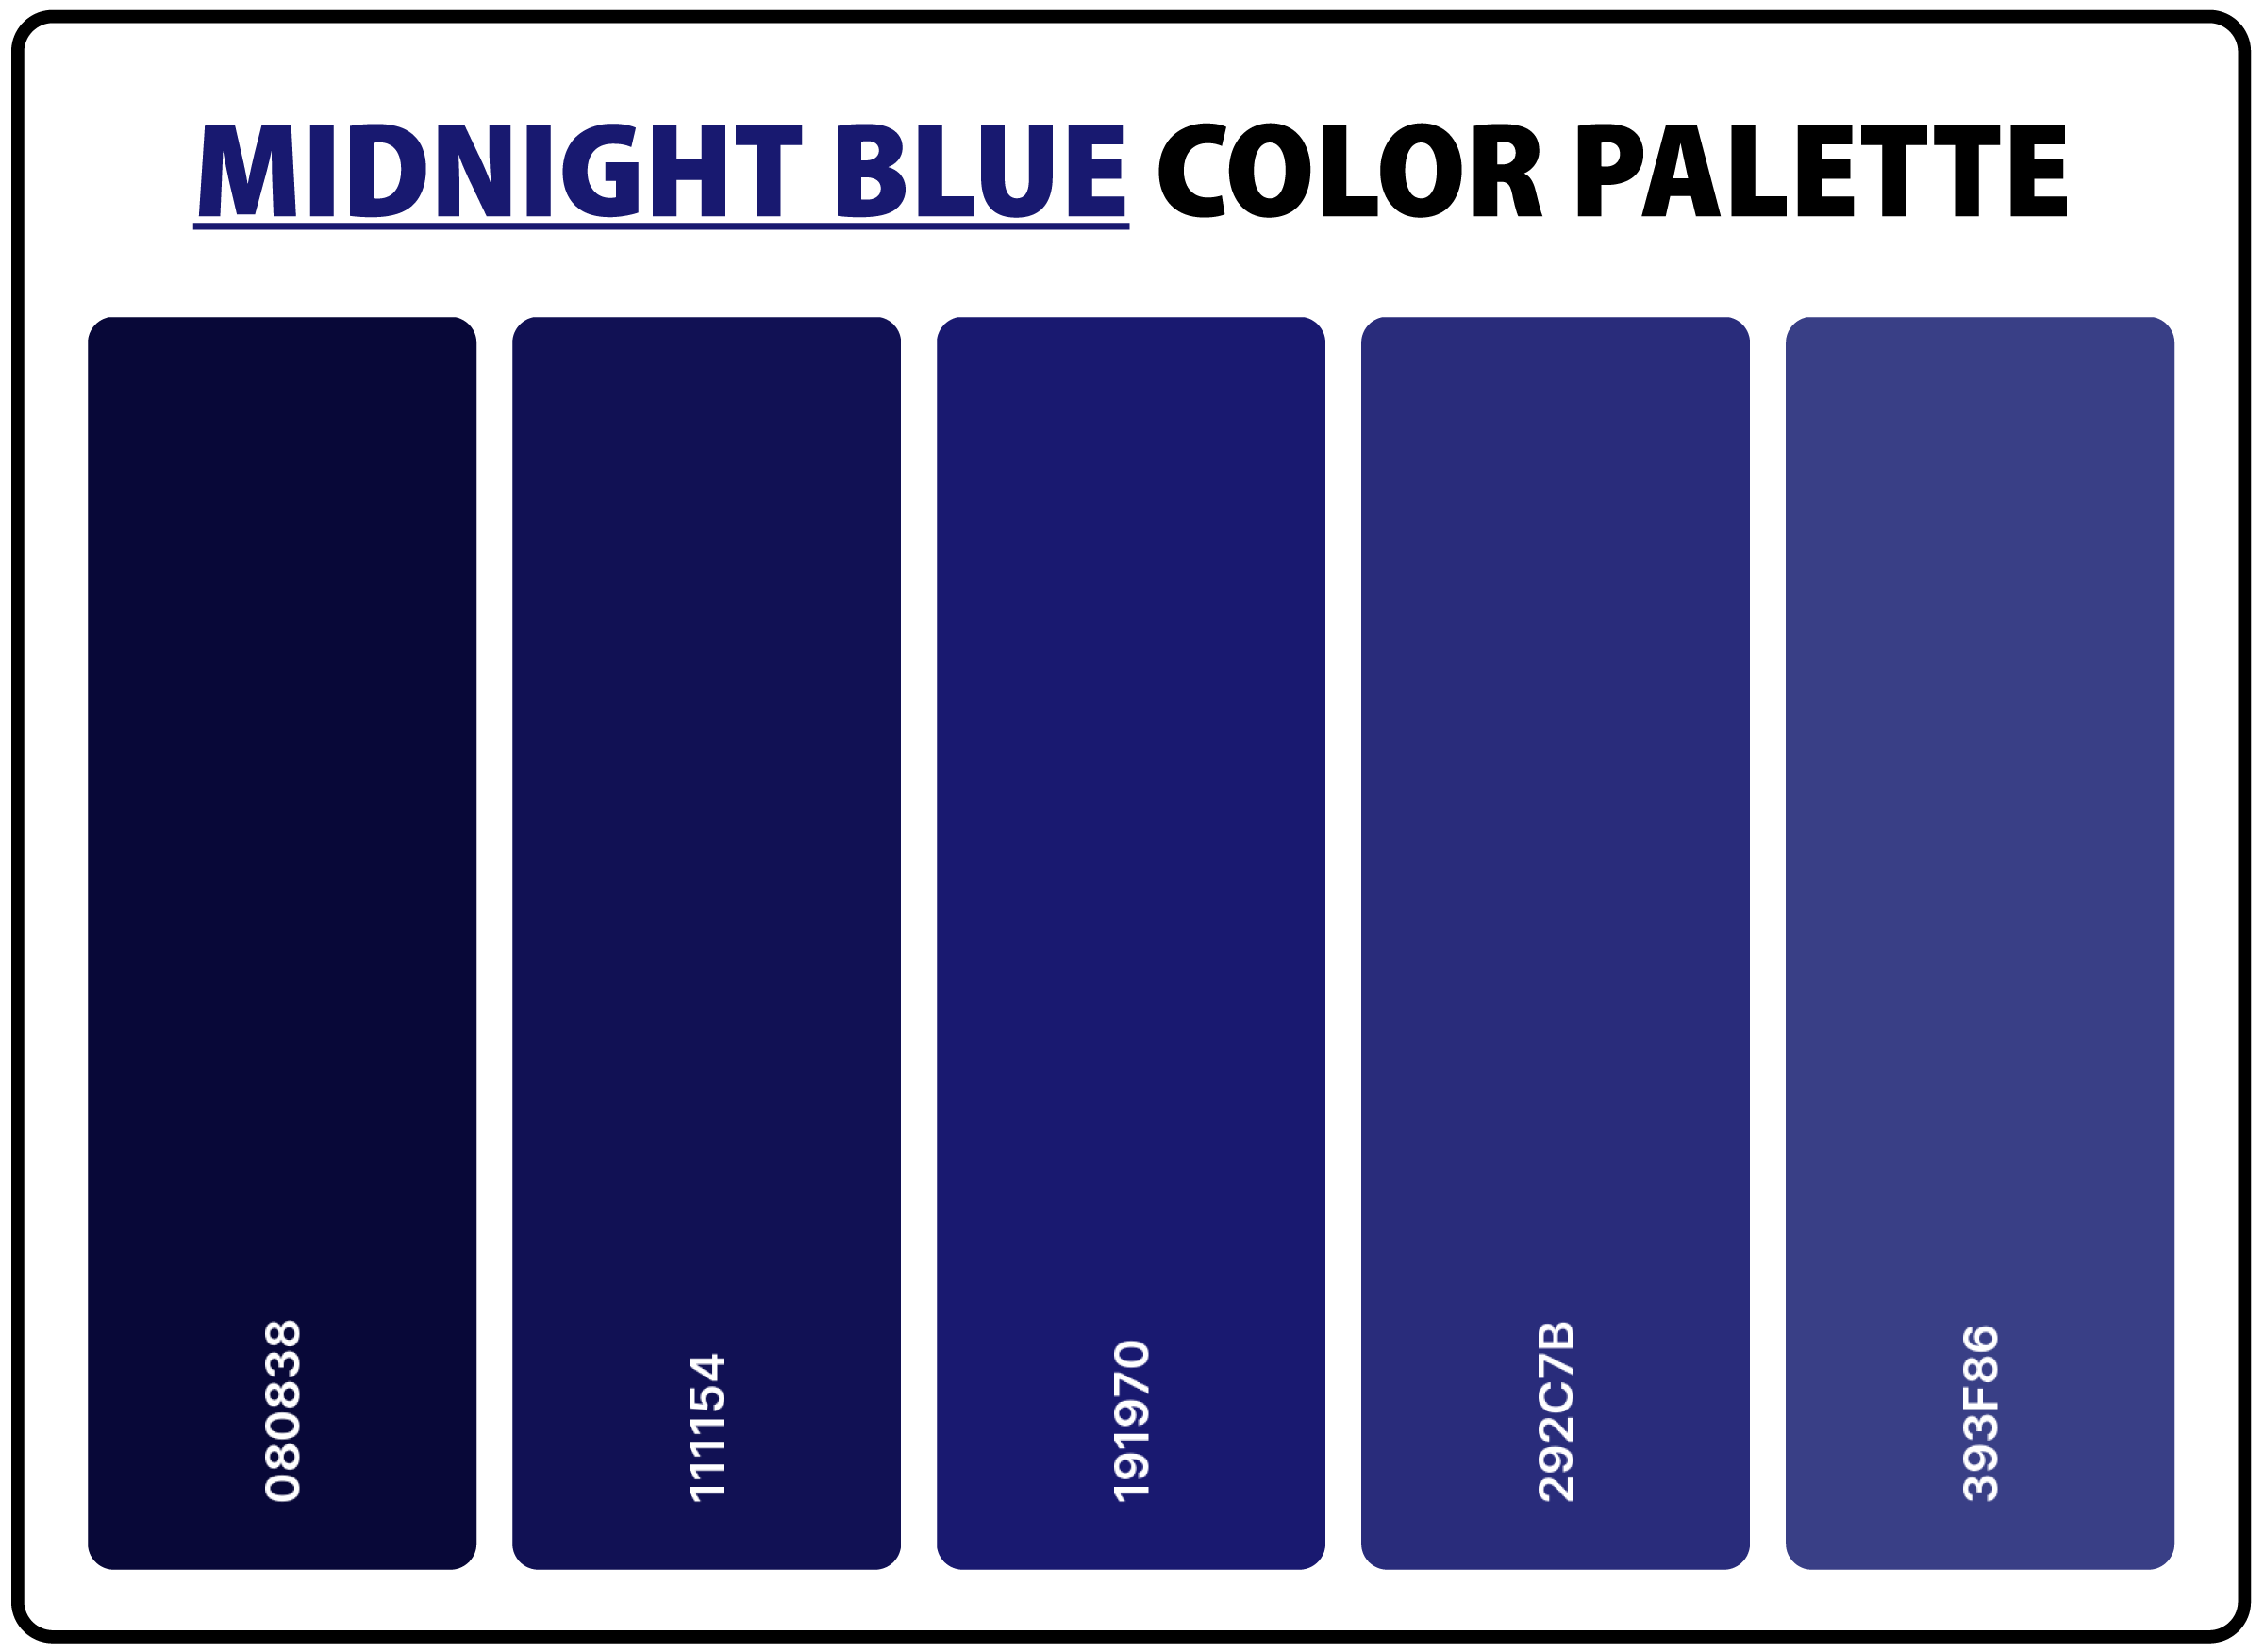 Midnight-Blue-Color-Palette-with-Hex-Codes